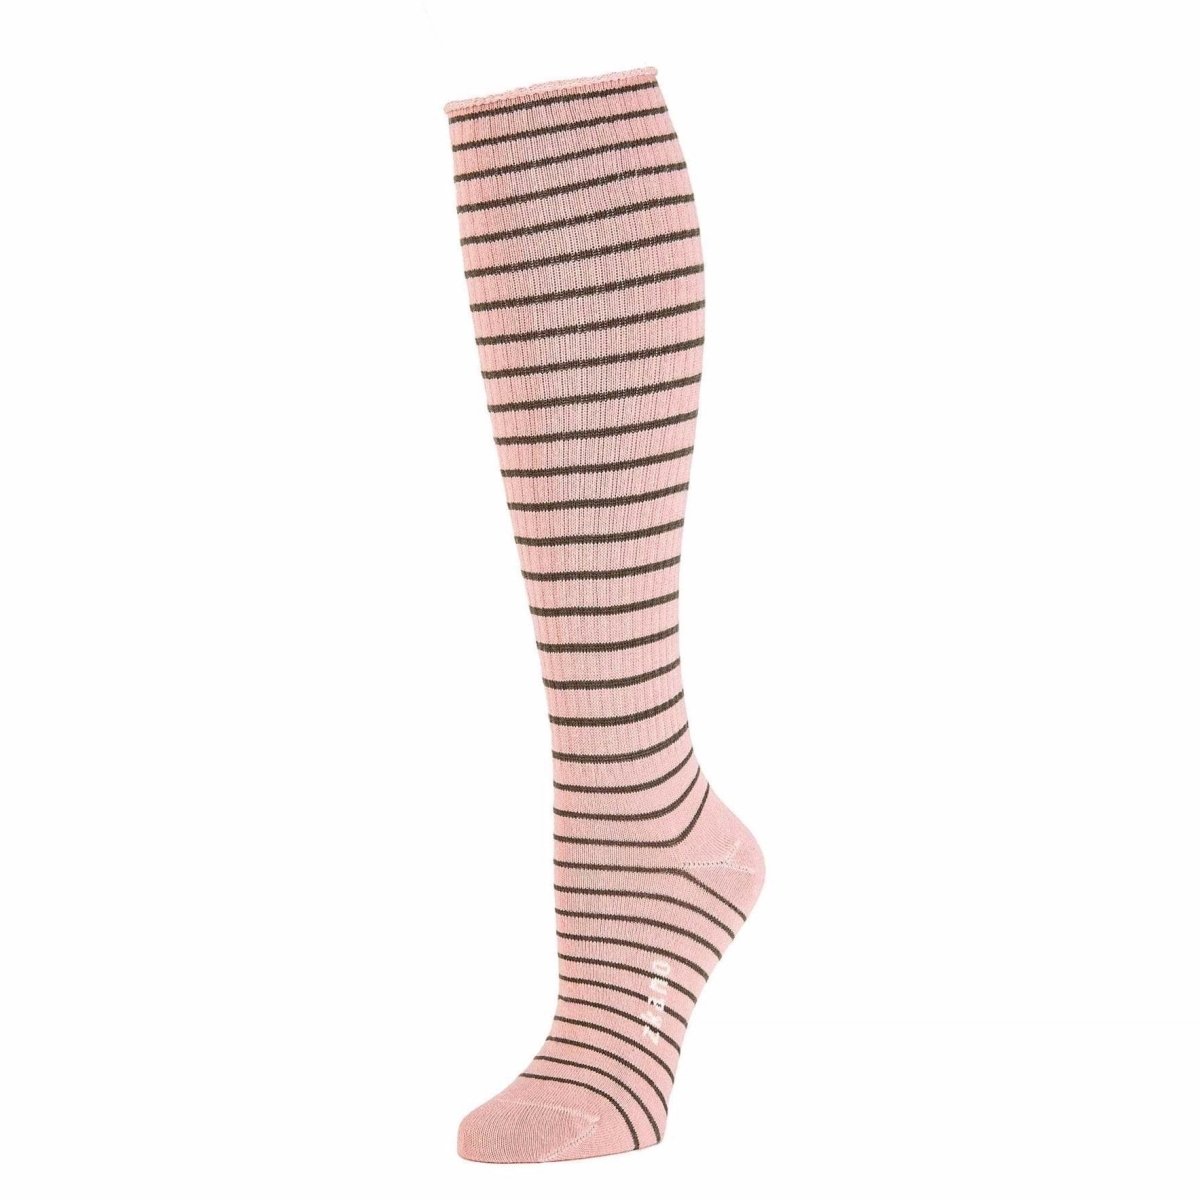 Ribbed knee sock in pink with a brown striped pattern. Logo along the arch is white. The Rose Striped Knee Sock in Antique Rose is from Zkano and made in Alabama, USA.